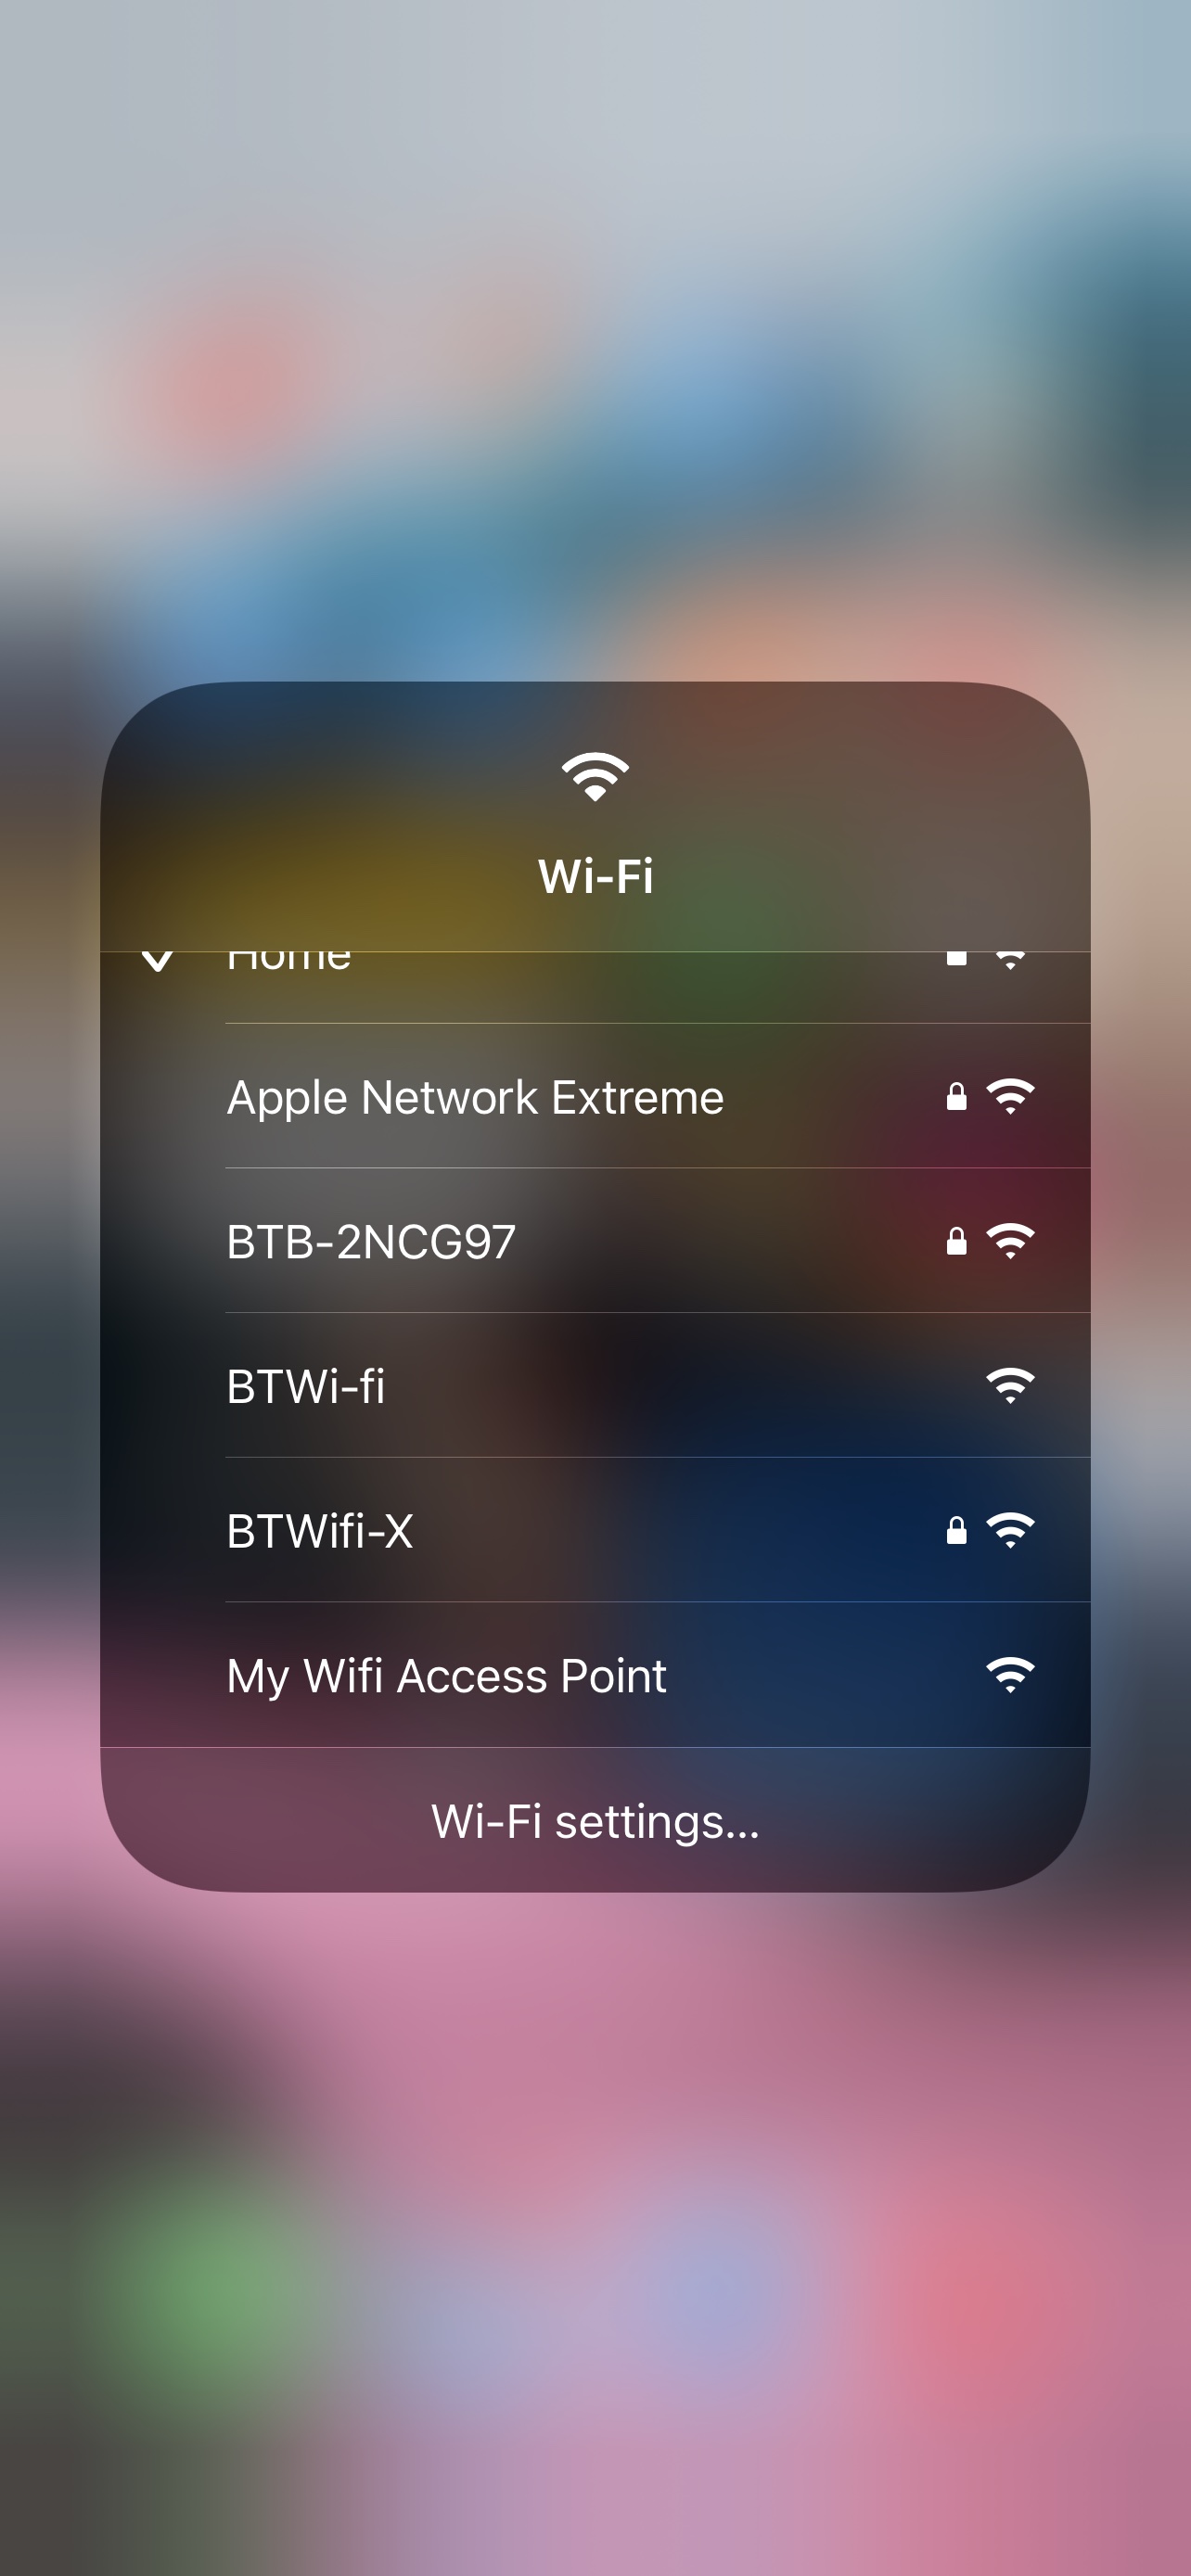 Access Point on an iPhone screen